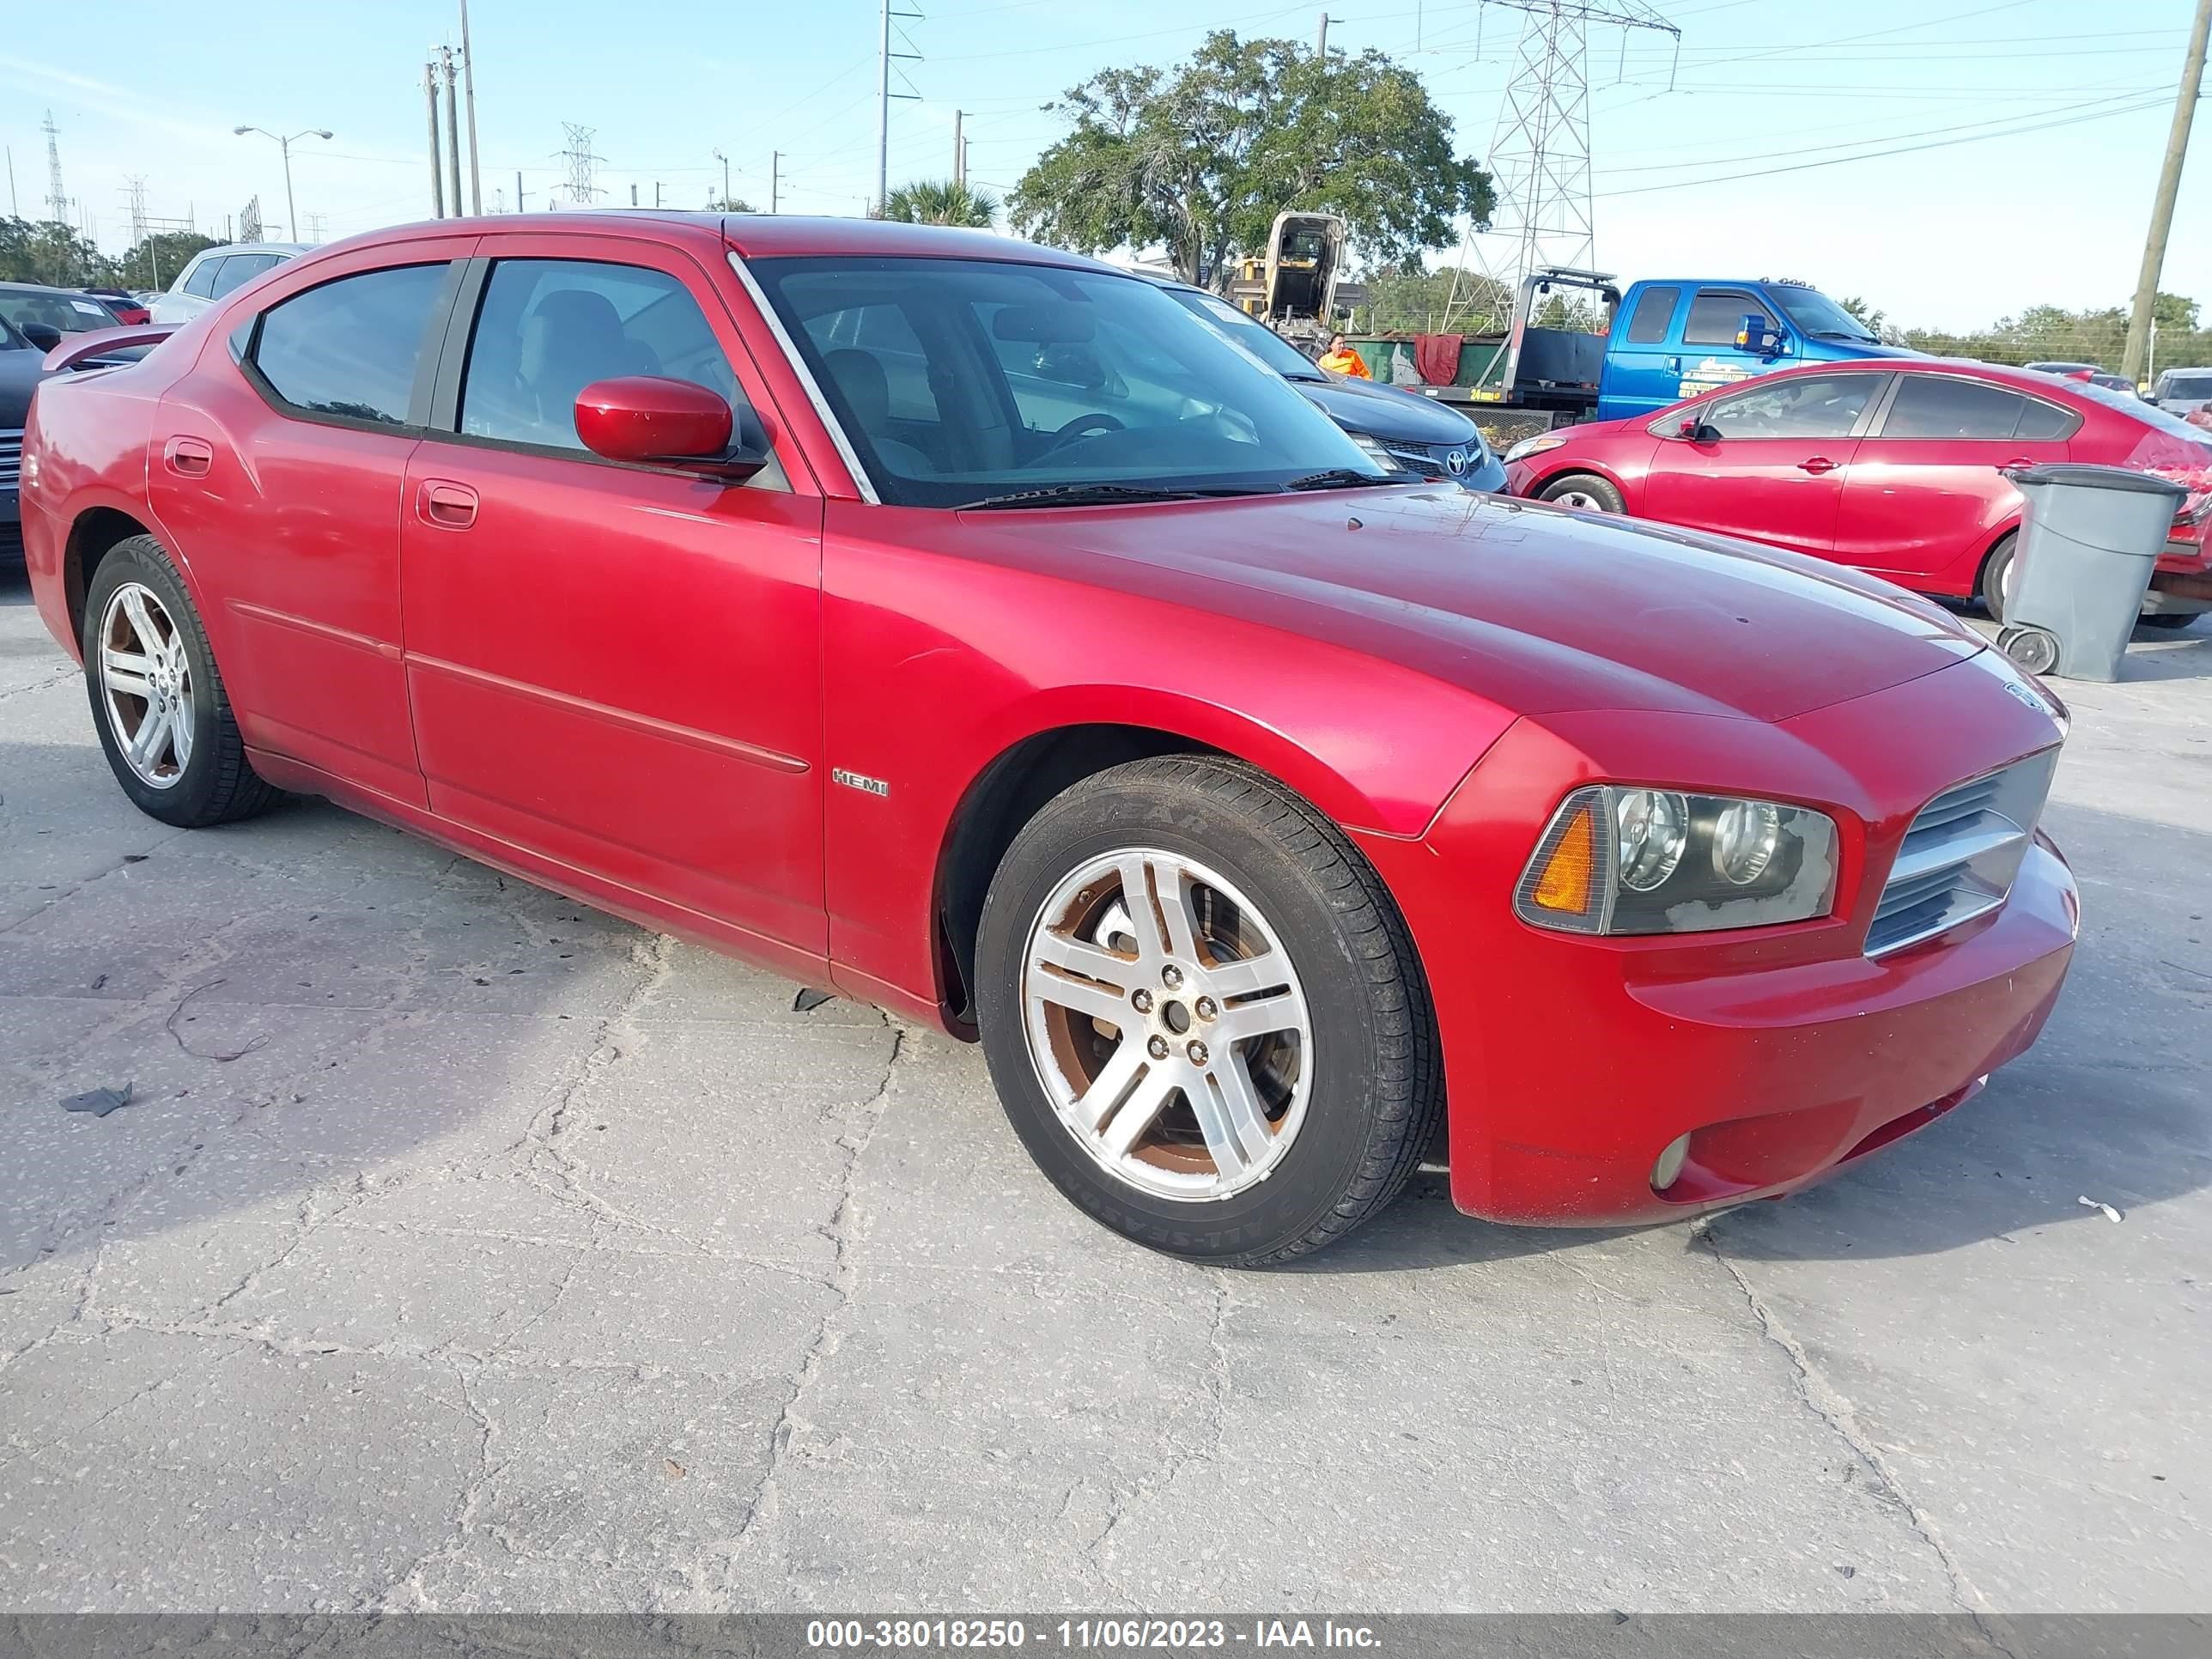 vin: 2B3KA53H36H397357 2B3KA53H36H397357 2006 dodge charger 5700 for Sale in 33760, 5152 126Th Ave N, Clearwater, USA